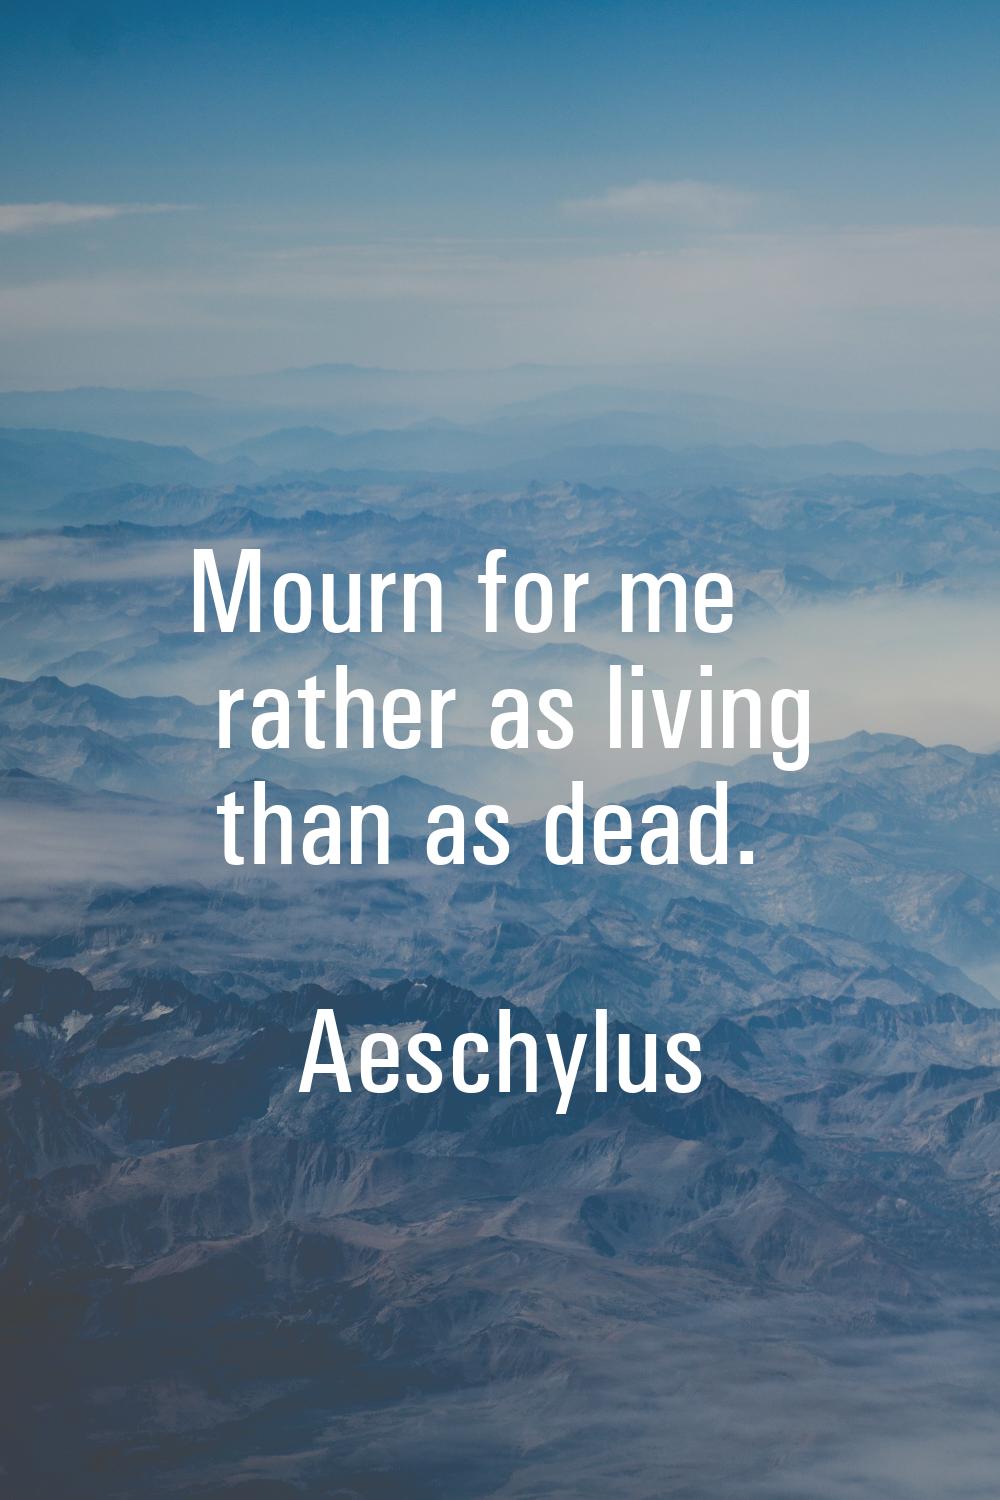 Mourn for me rather as living than as dead.